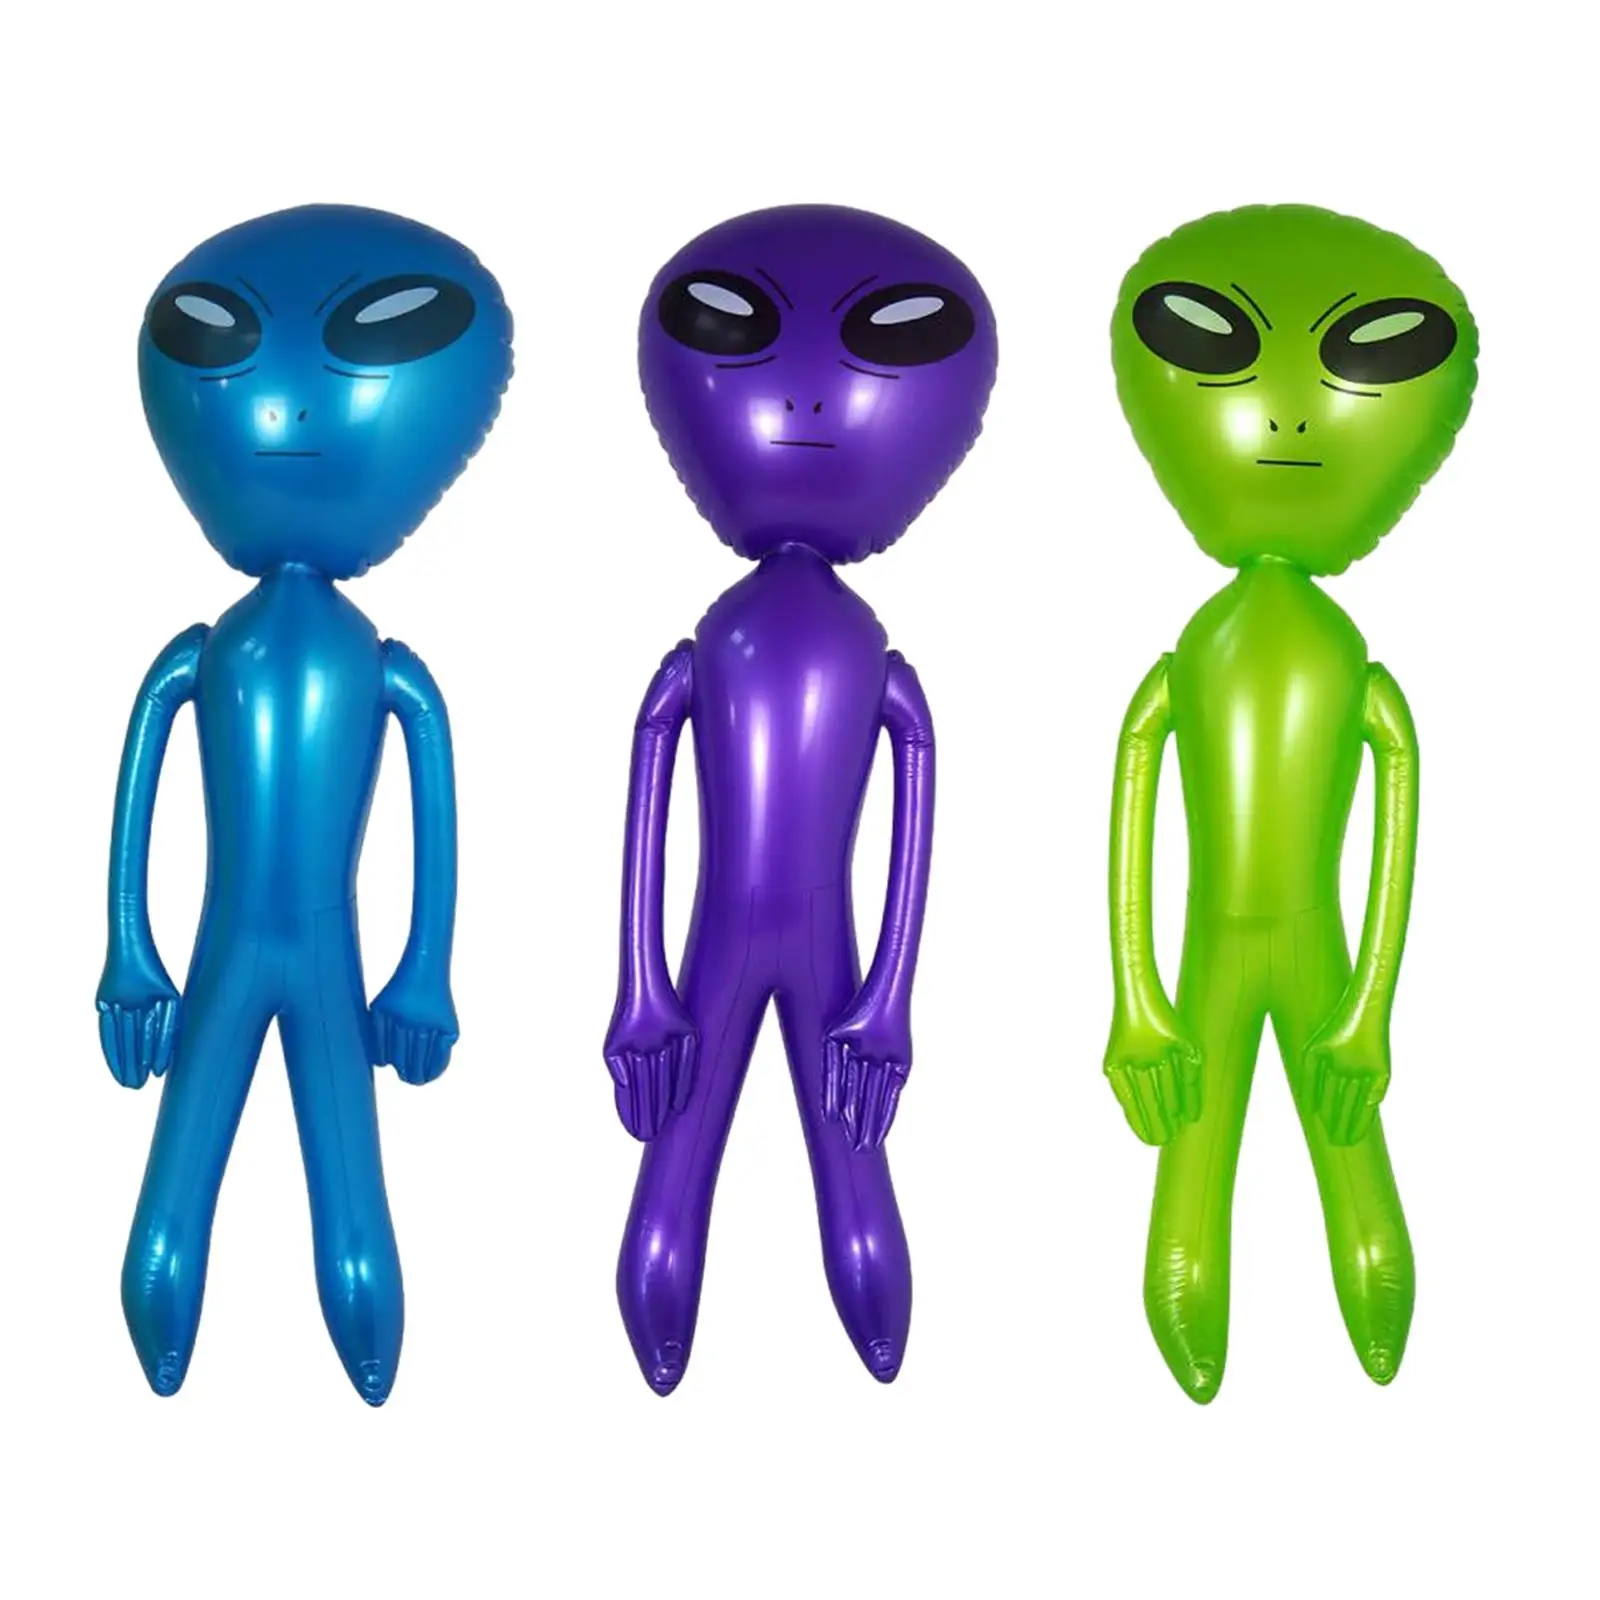 Inflatable Alien Toy Inflatable Figures PVC Alien Balloon for Game Prize Alien Theme Party Halloween Festival Garden Decoration